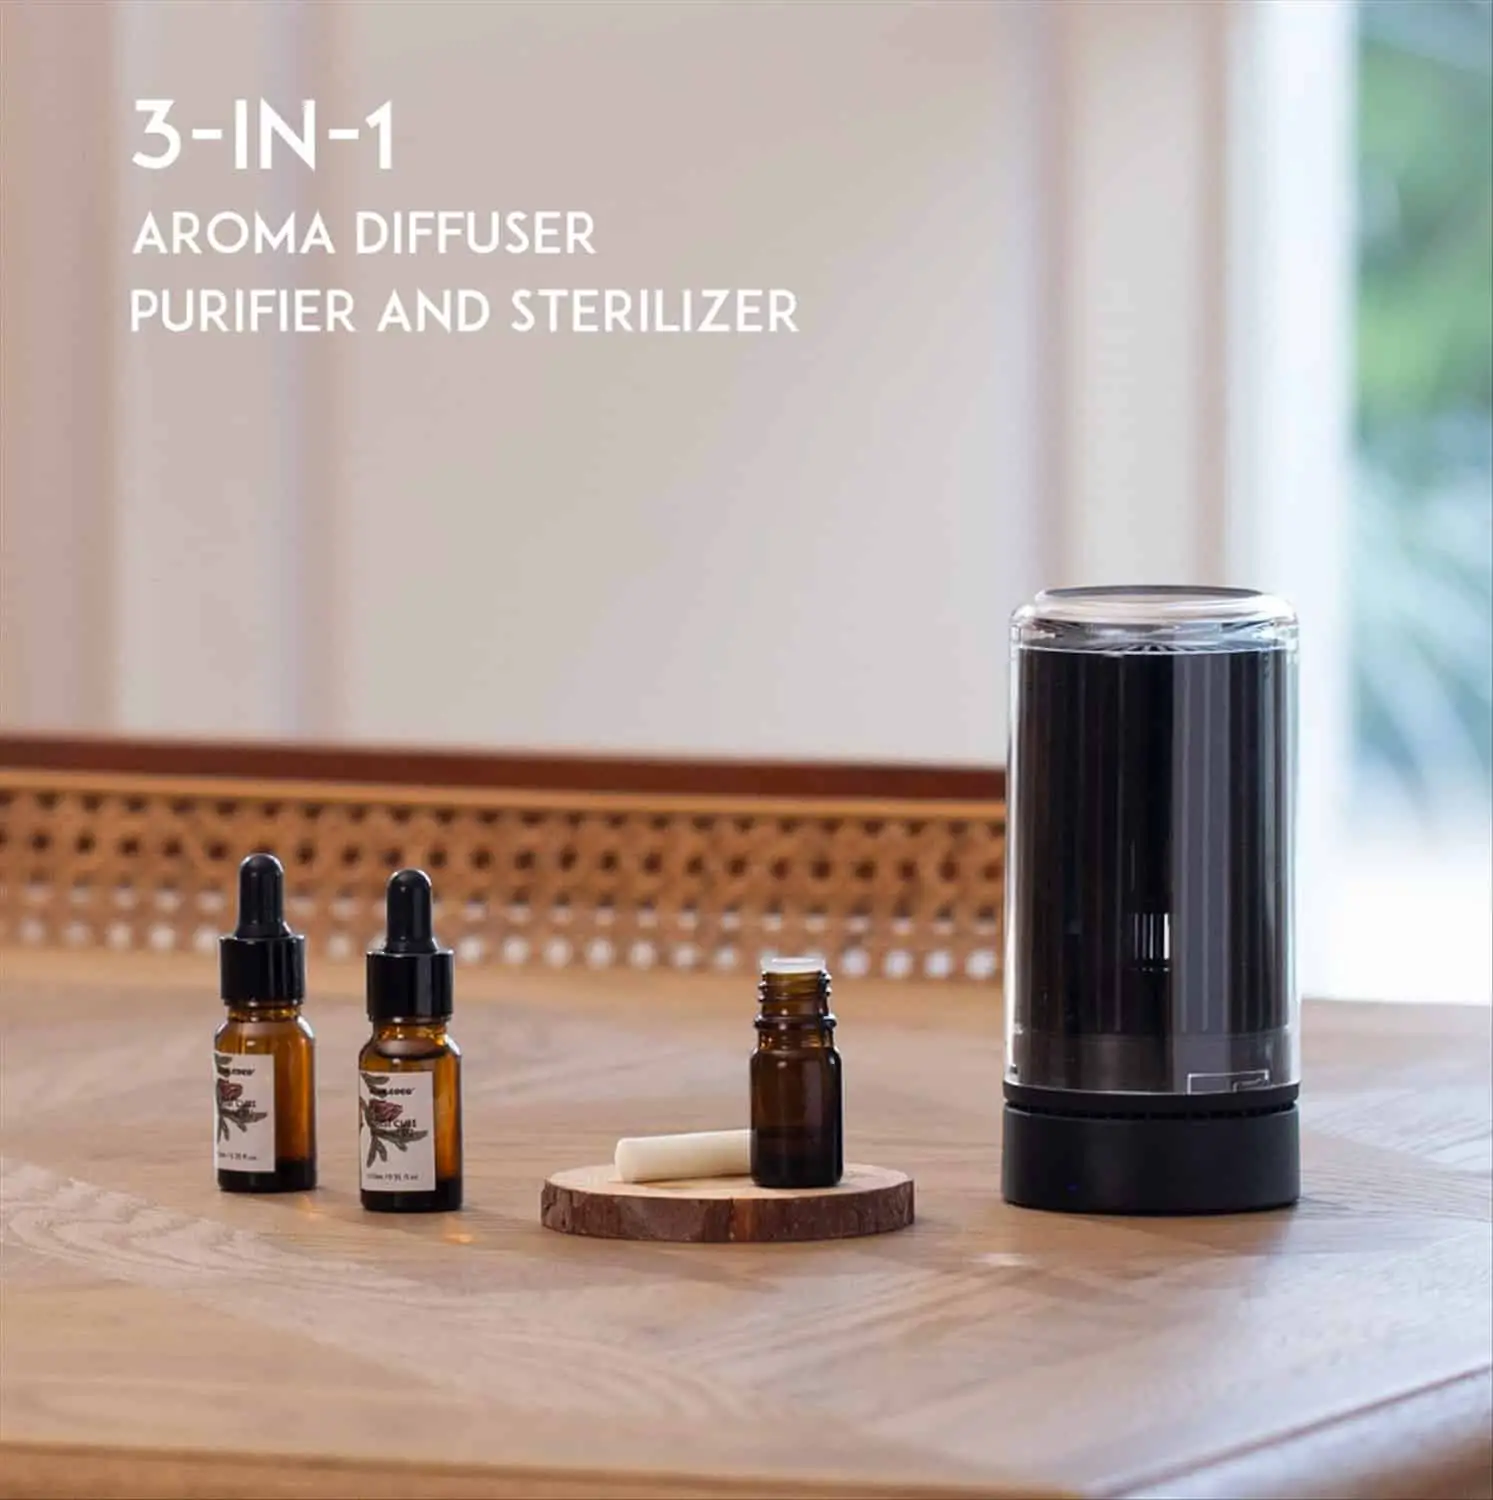 Breathe Easier with This Portable Air Purifier, Now Only $129.99 | Entrepreneur